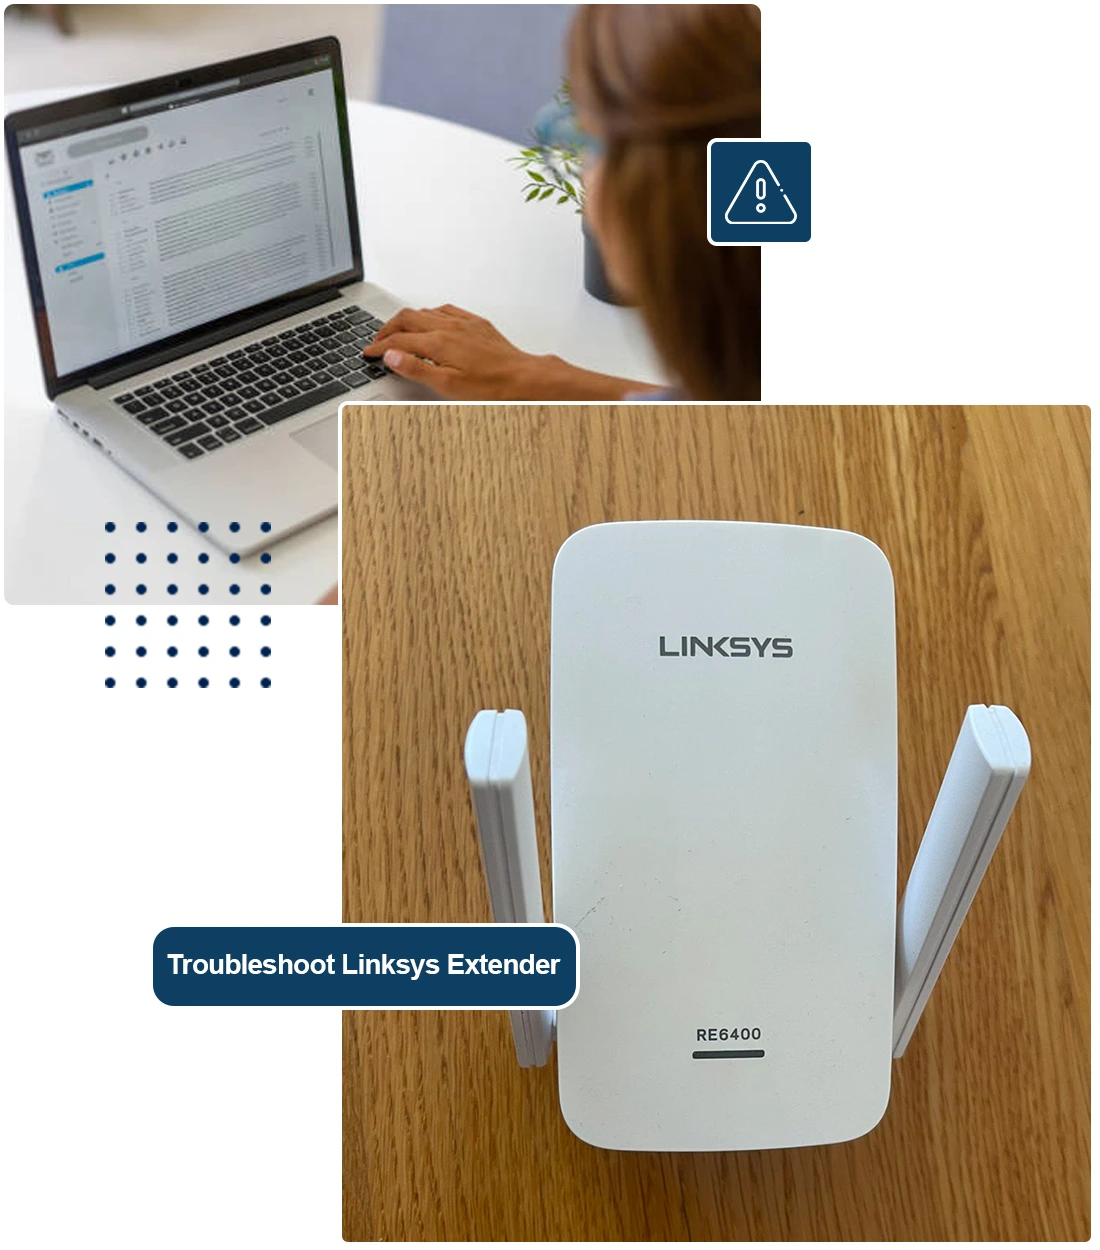 How To Troubleshoot Linksys Extender RE6400 Setup Issue